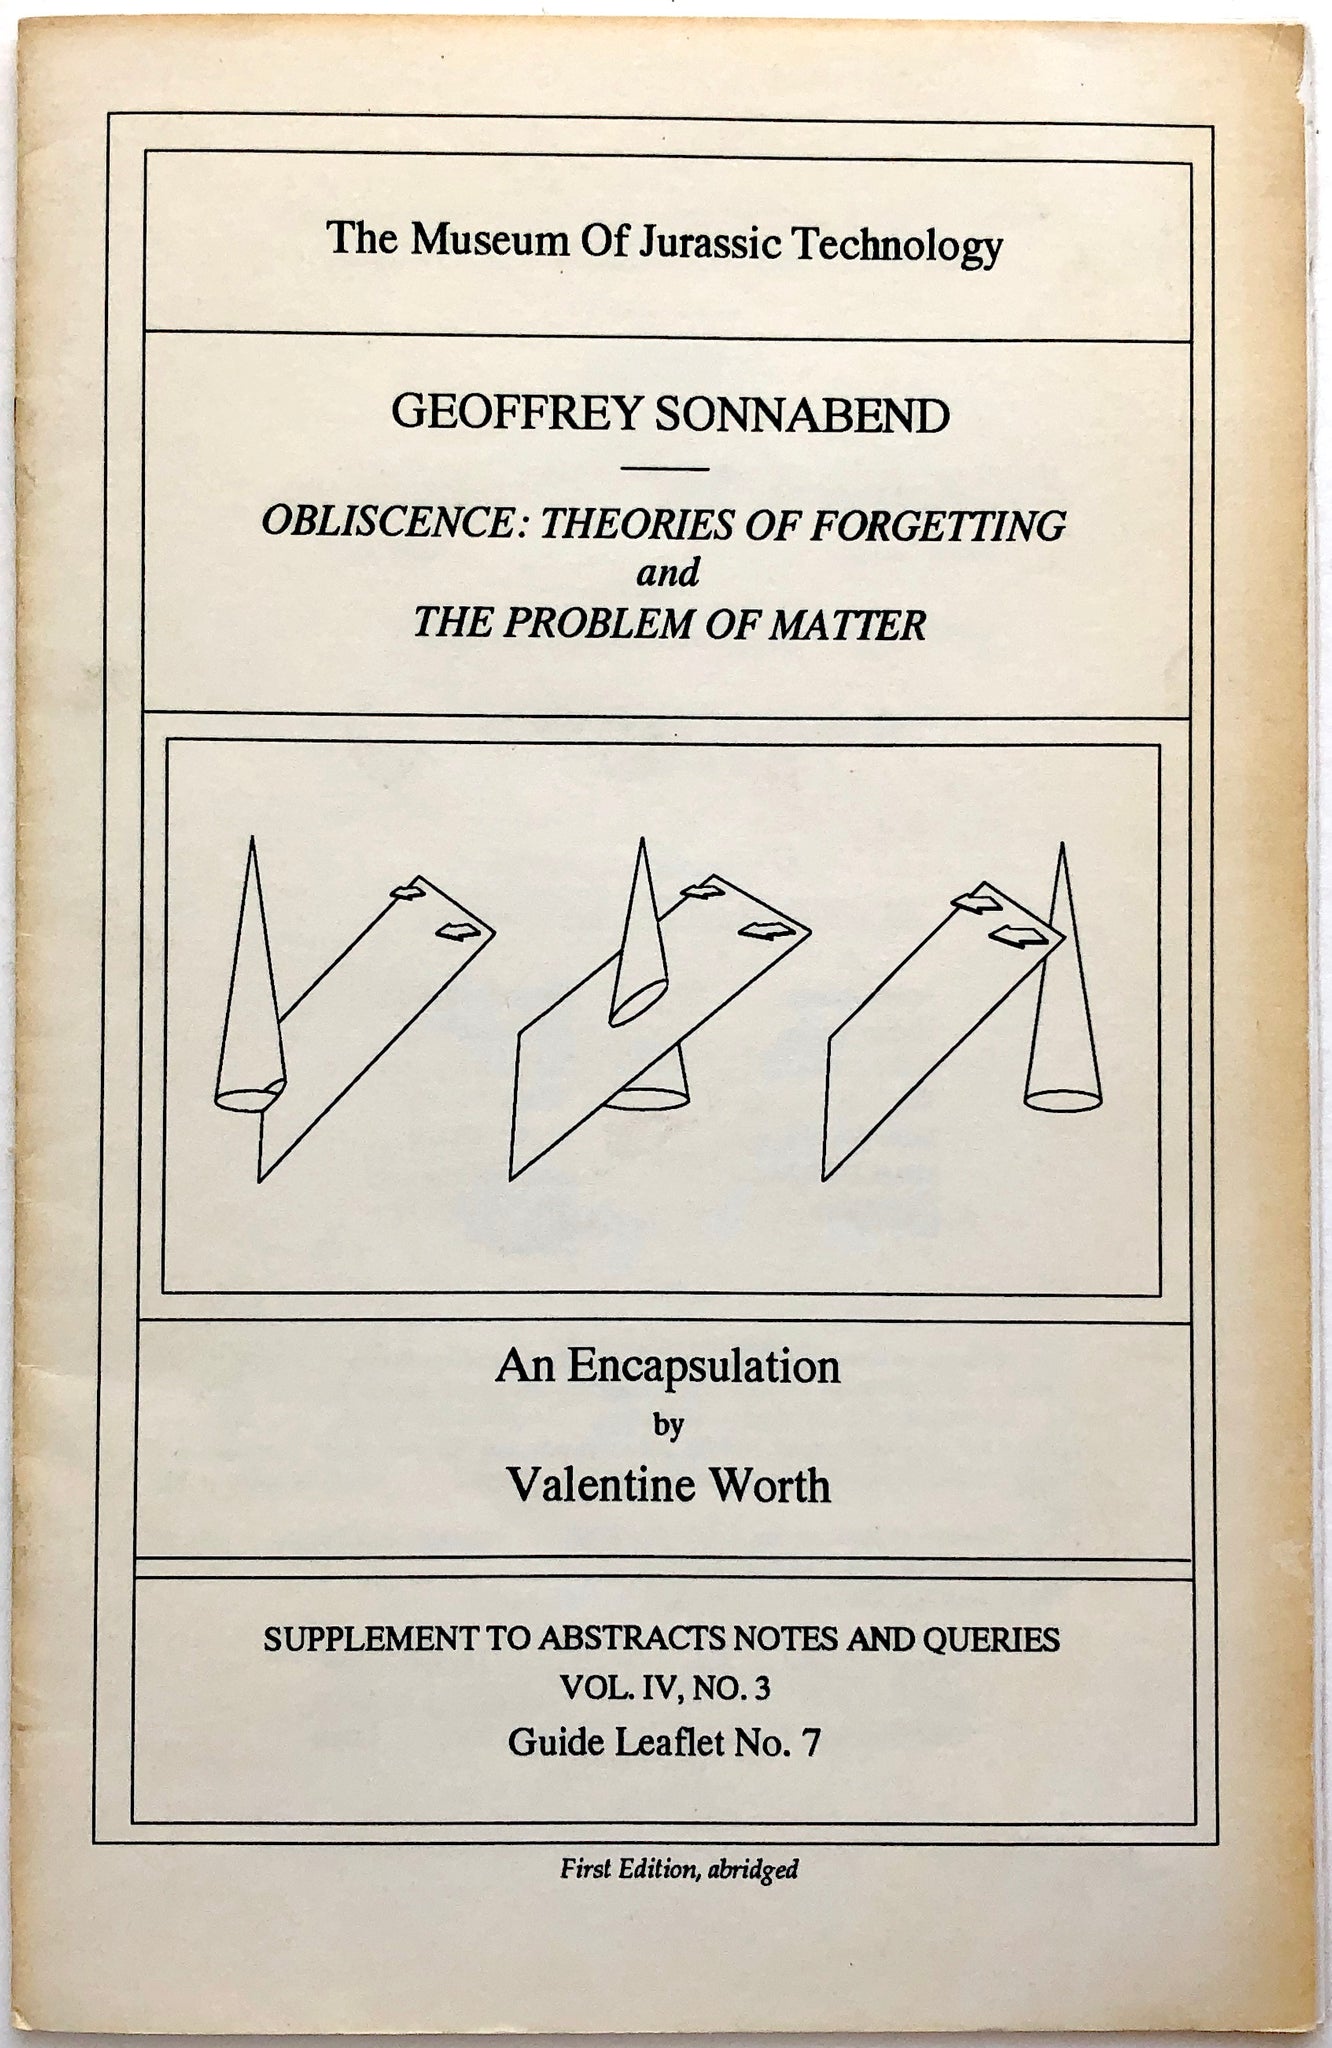 Geoffrey Sonnabend’s Obliscence: Theories of Forgetting and the Problem of Matter